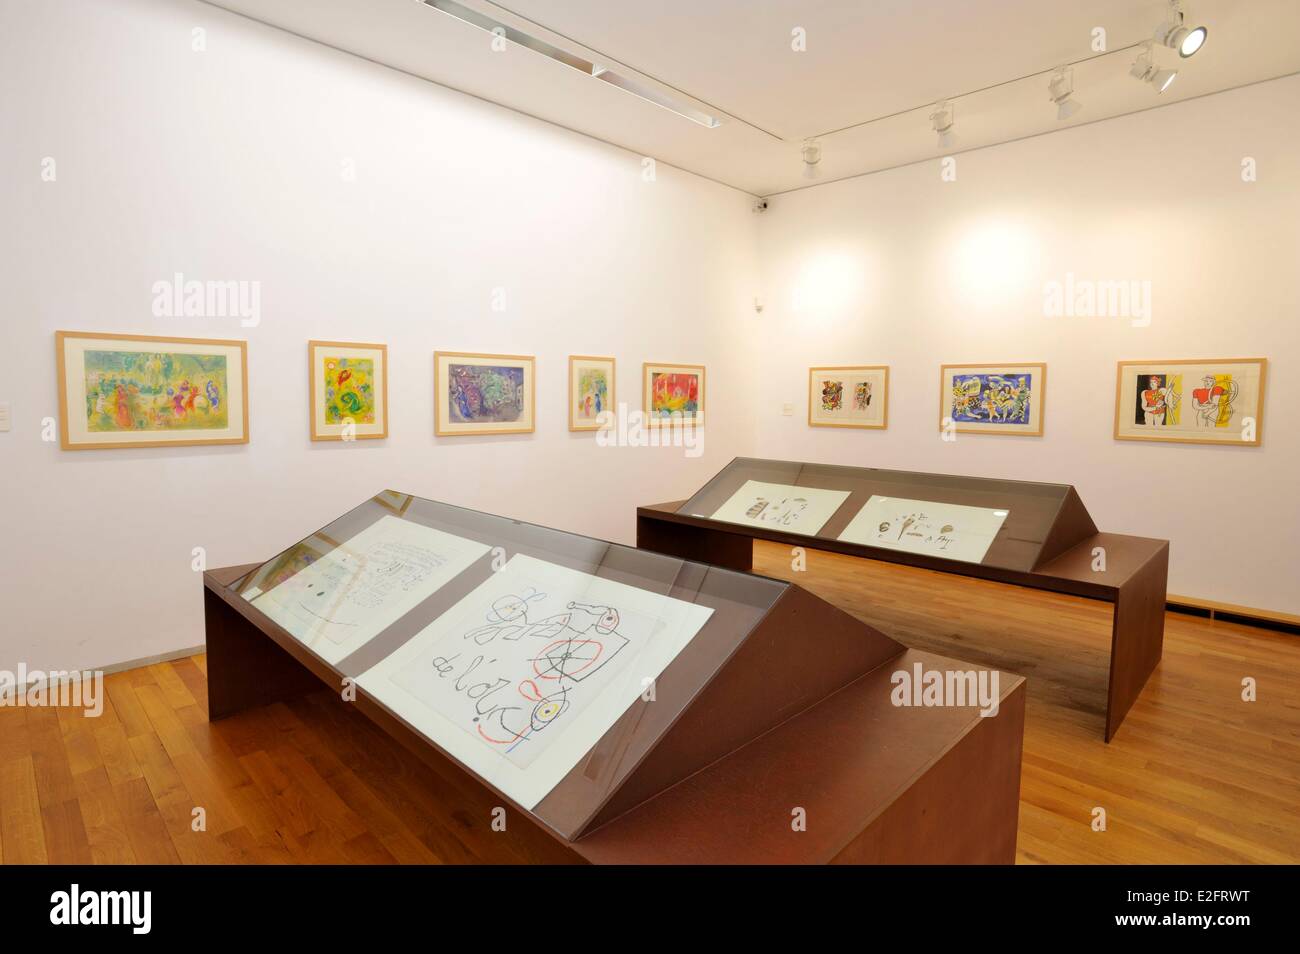 France Nord Le Cateau Cambresis Palais Fenelon Musee Matisse Teriade's  collection (Matisse publisher) Henri Matisse paintings Stock Photo - Alamy